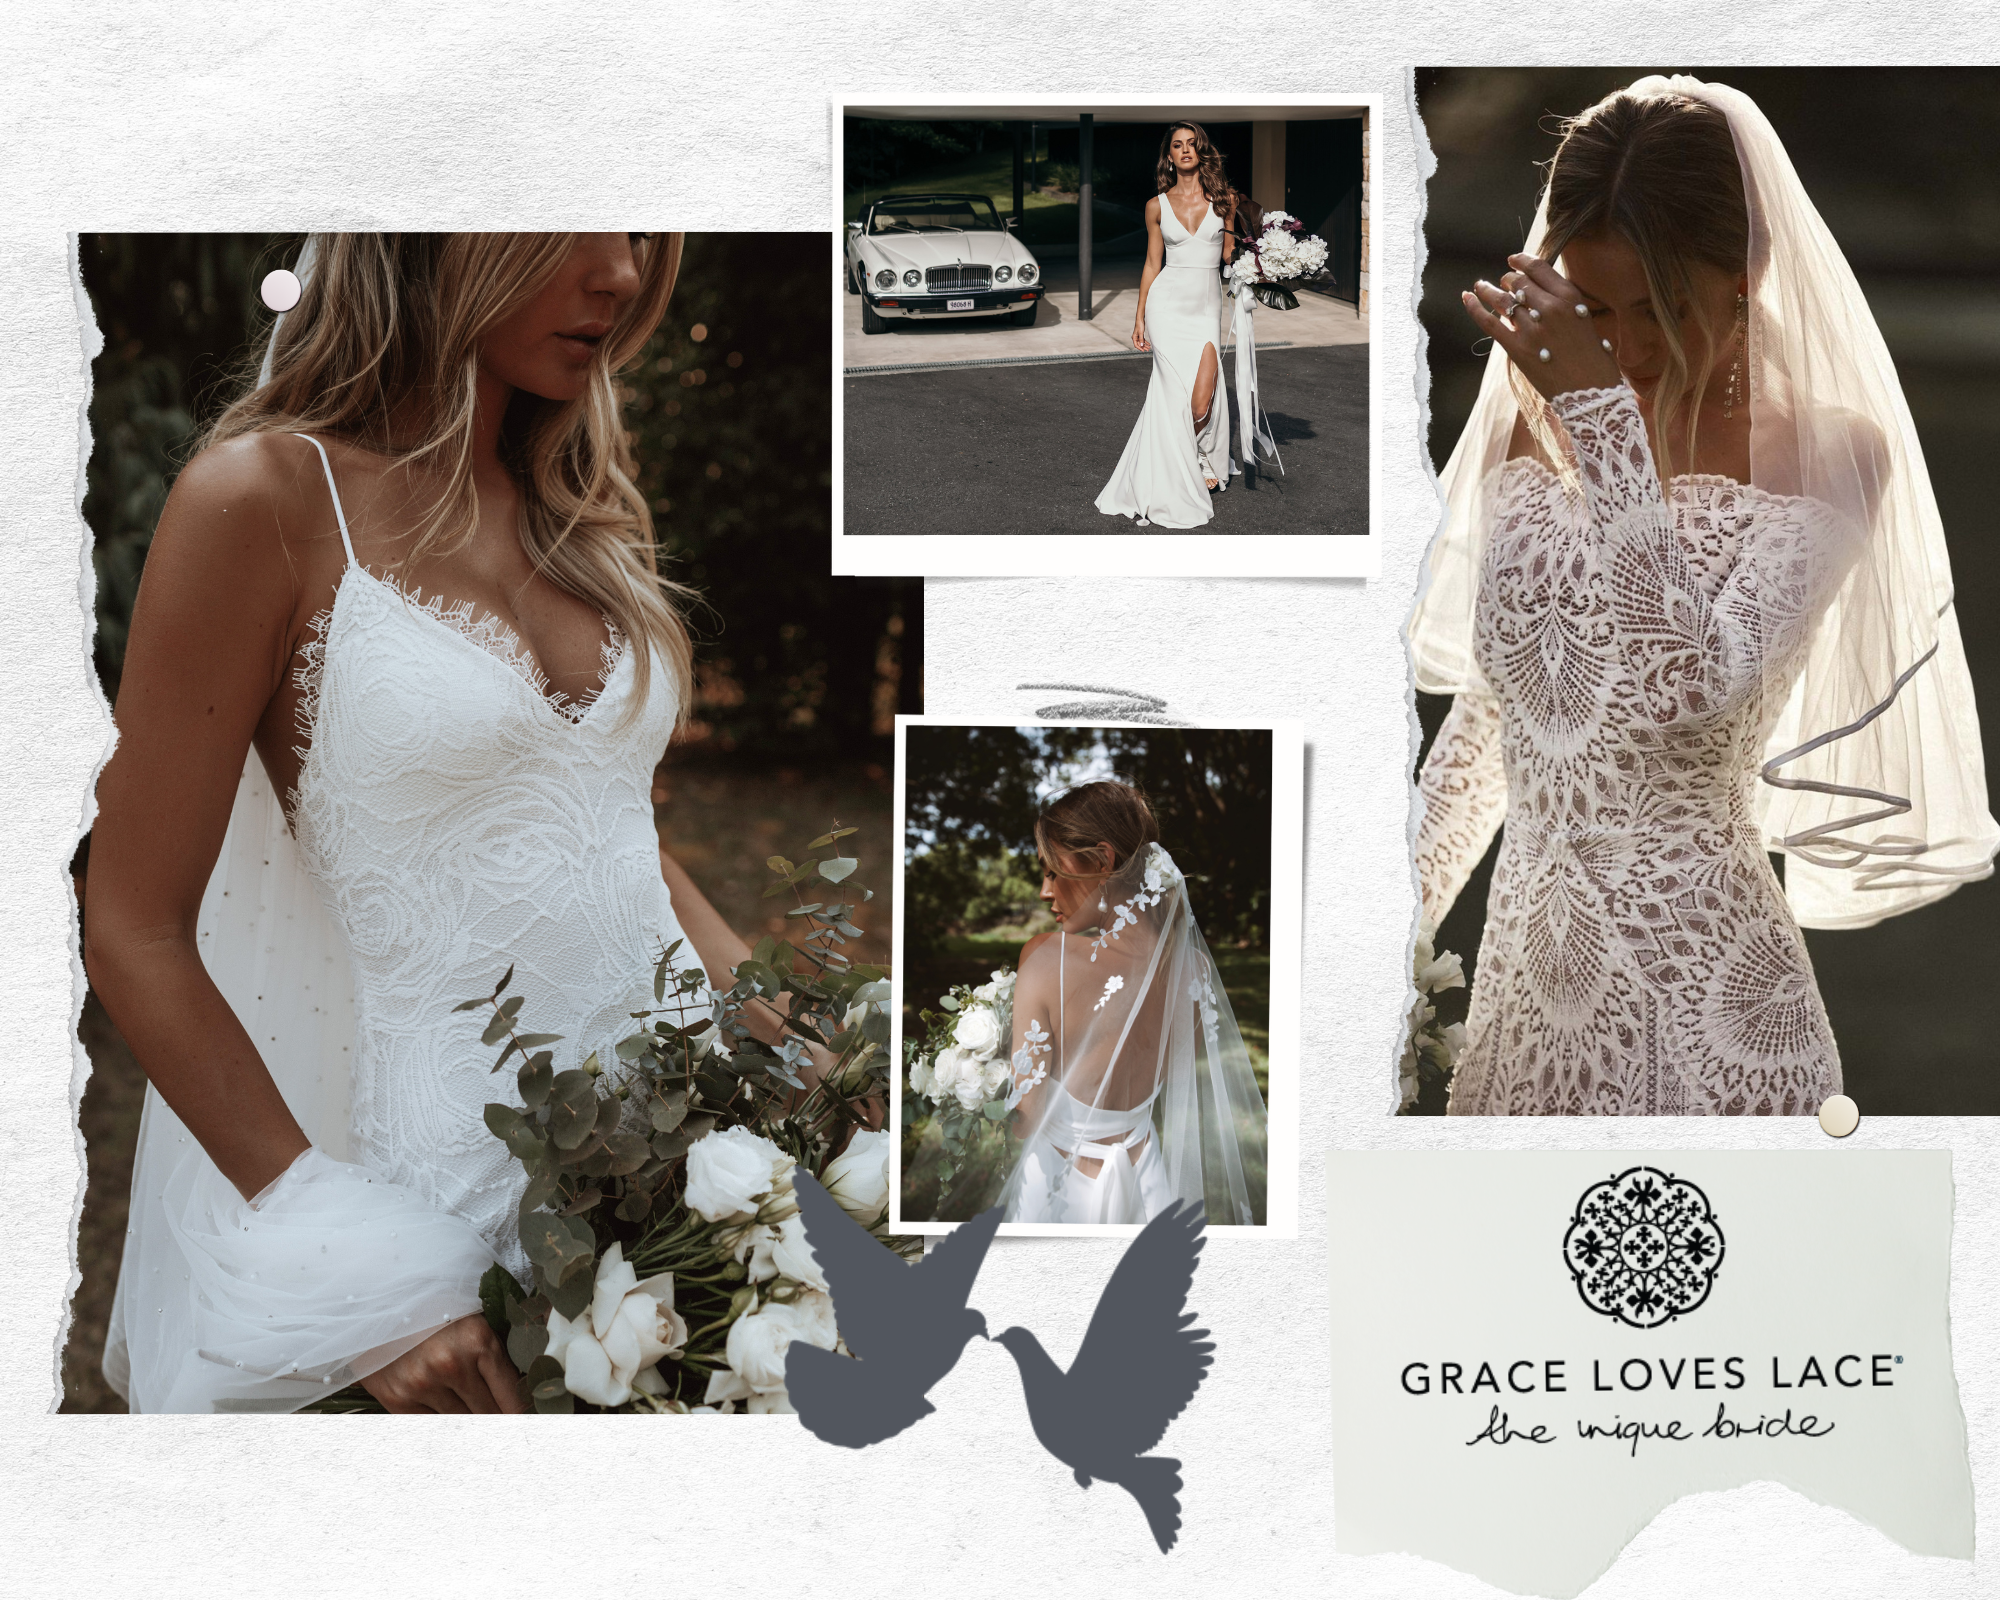 Grace Loves Lace at Love Bridal Cheshire